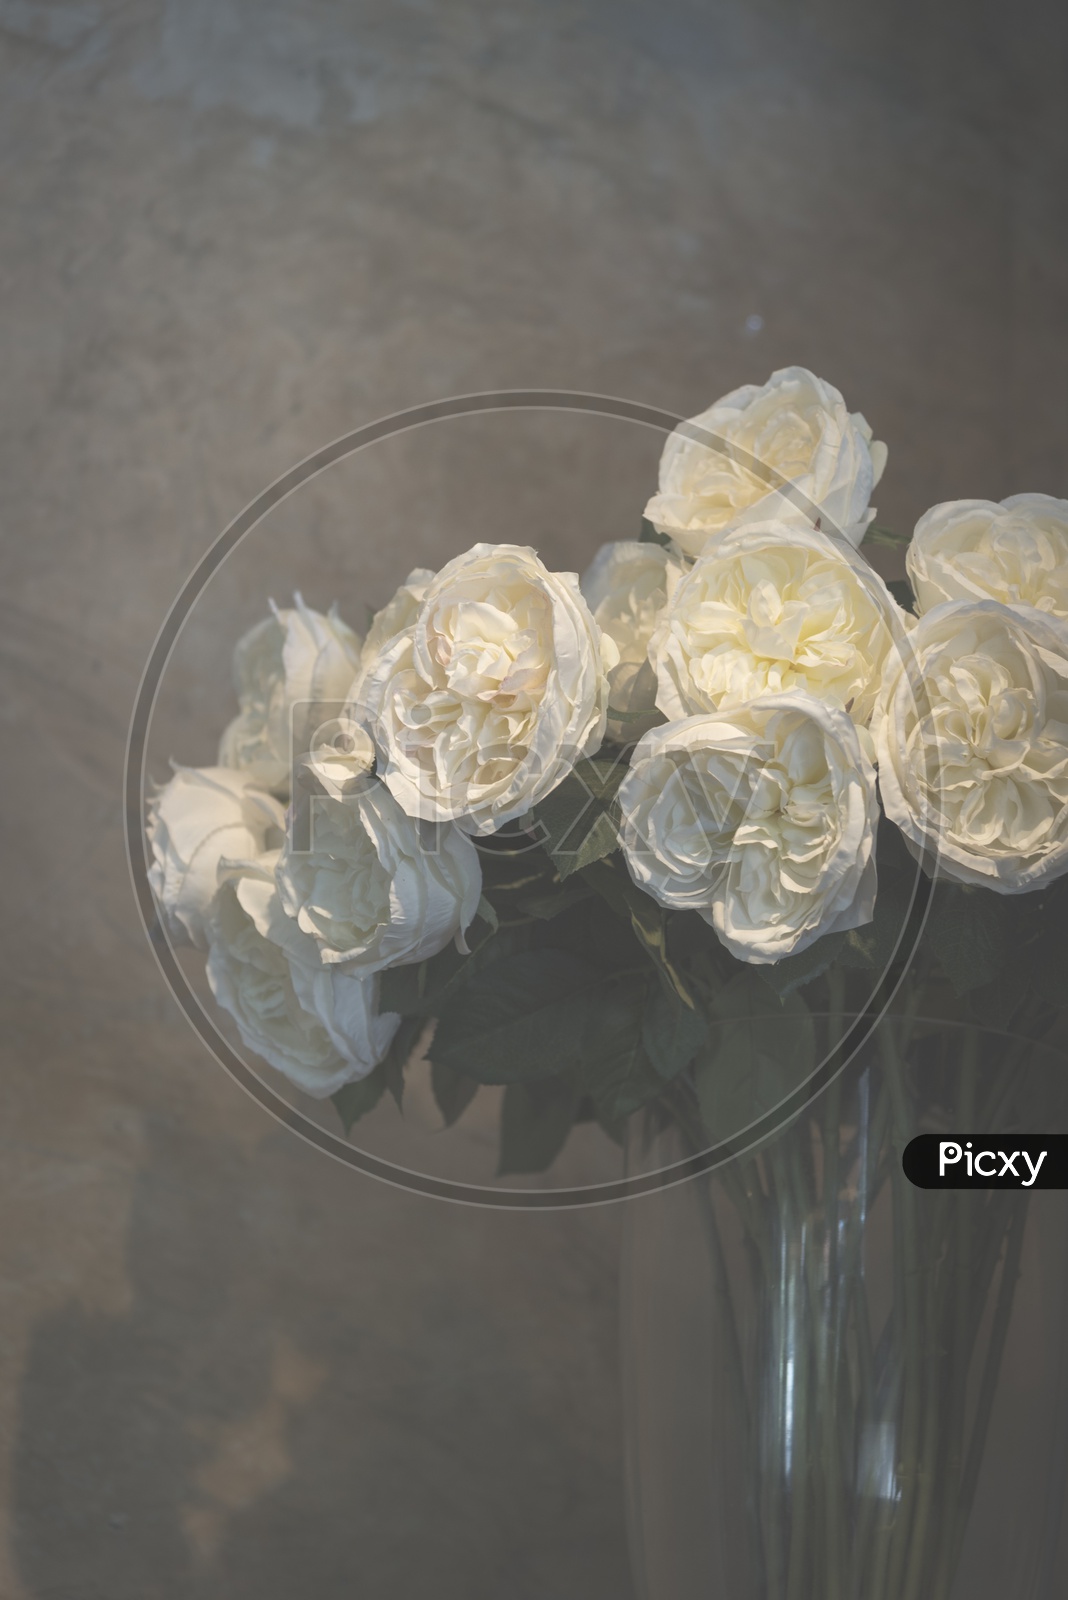 White Rose Flowers In a Vase Over Beige Wall Background